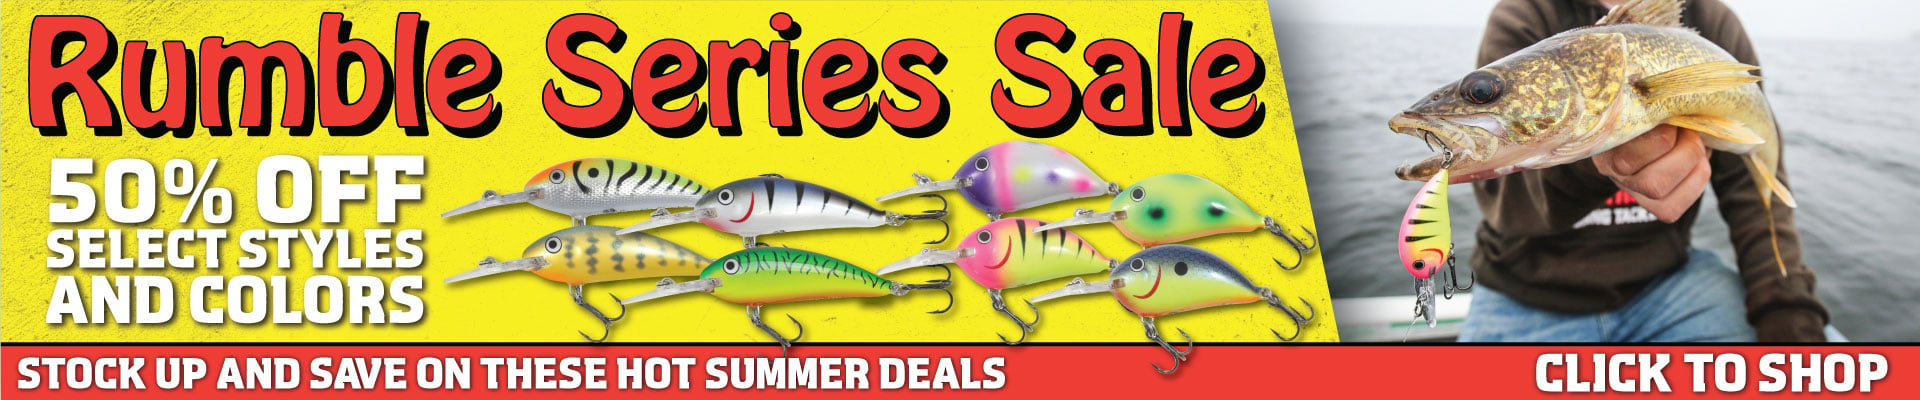 Northland Fishing Tackle Rumble crankbait sale, 50% off select styles and colors.